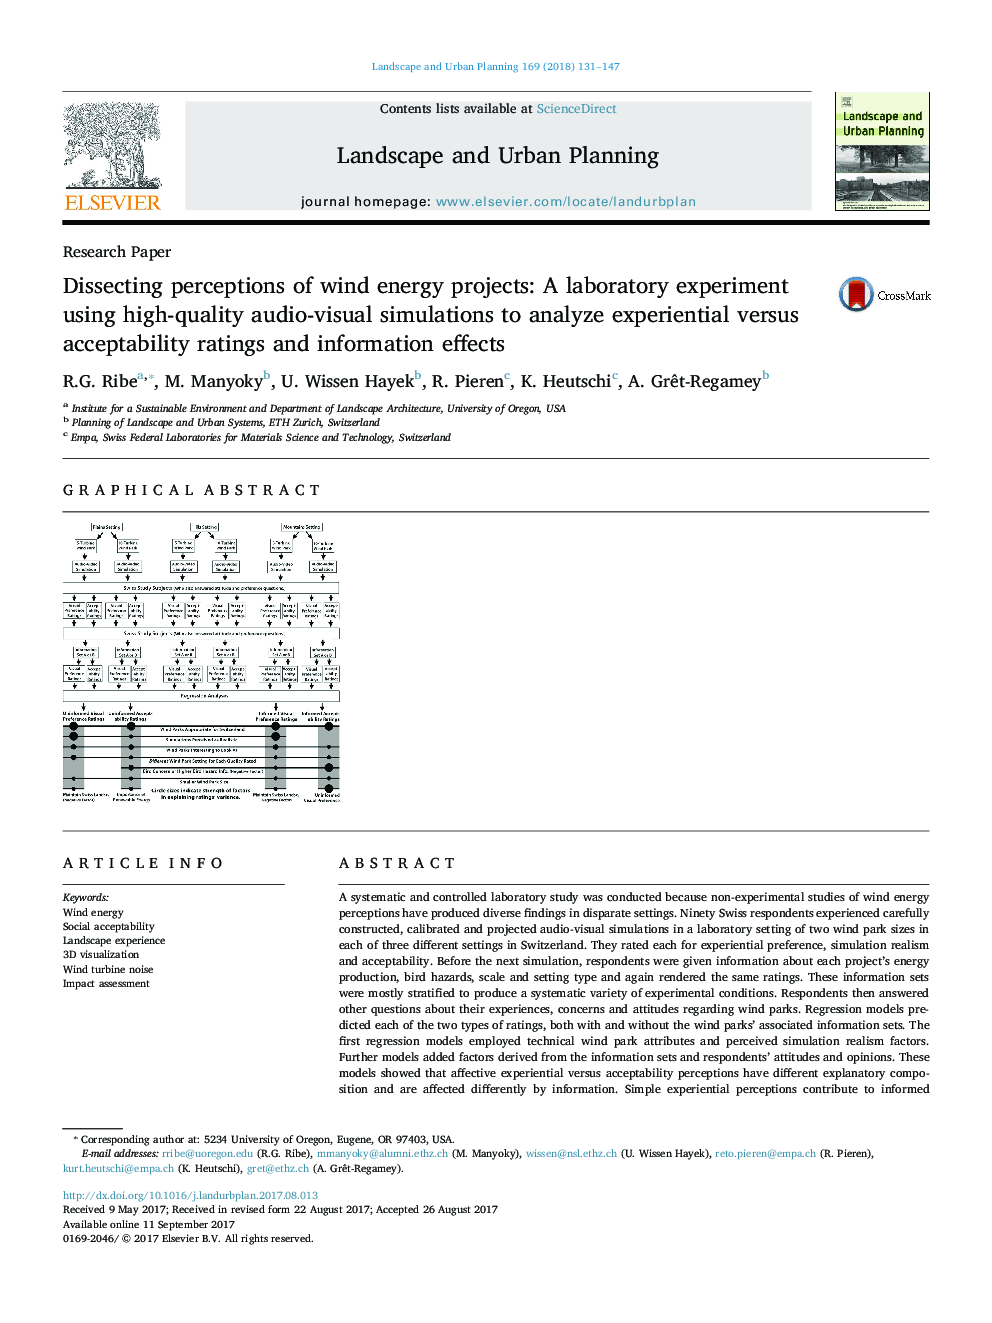 Dissecting perceptions of wind energy projects: A laboratory experiment using high-quality audio-visual simulations to analyze experiential versus acceptability ratings and information effects